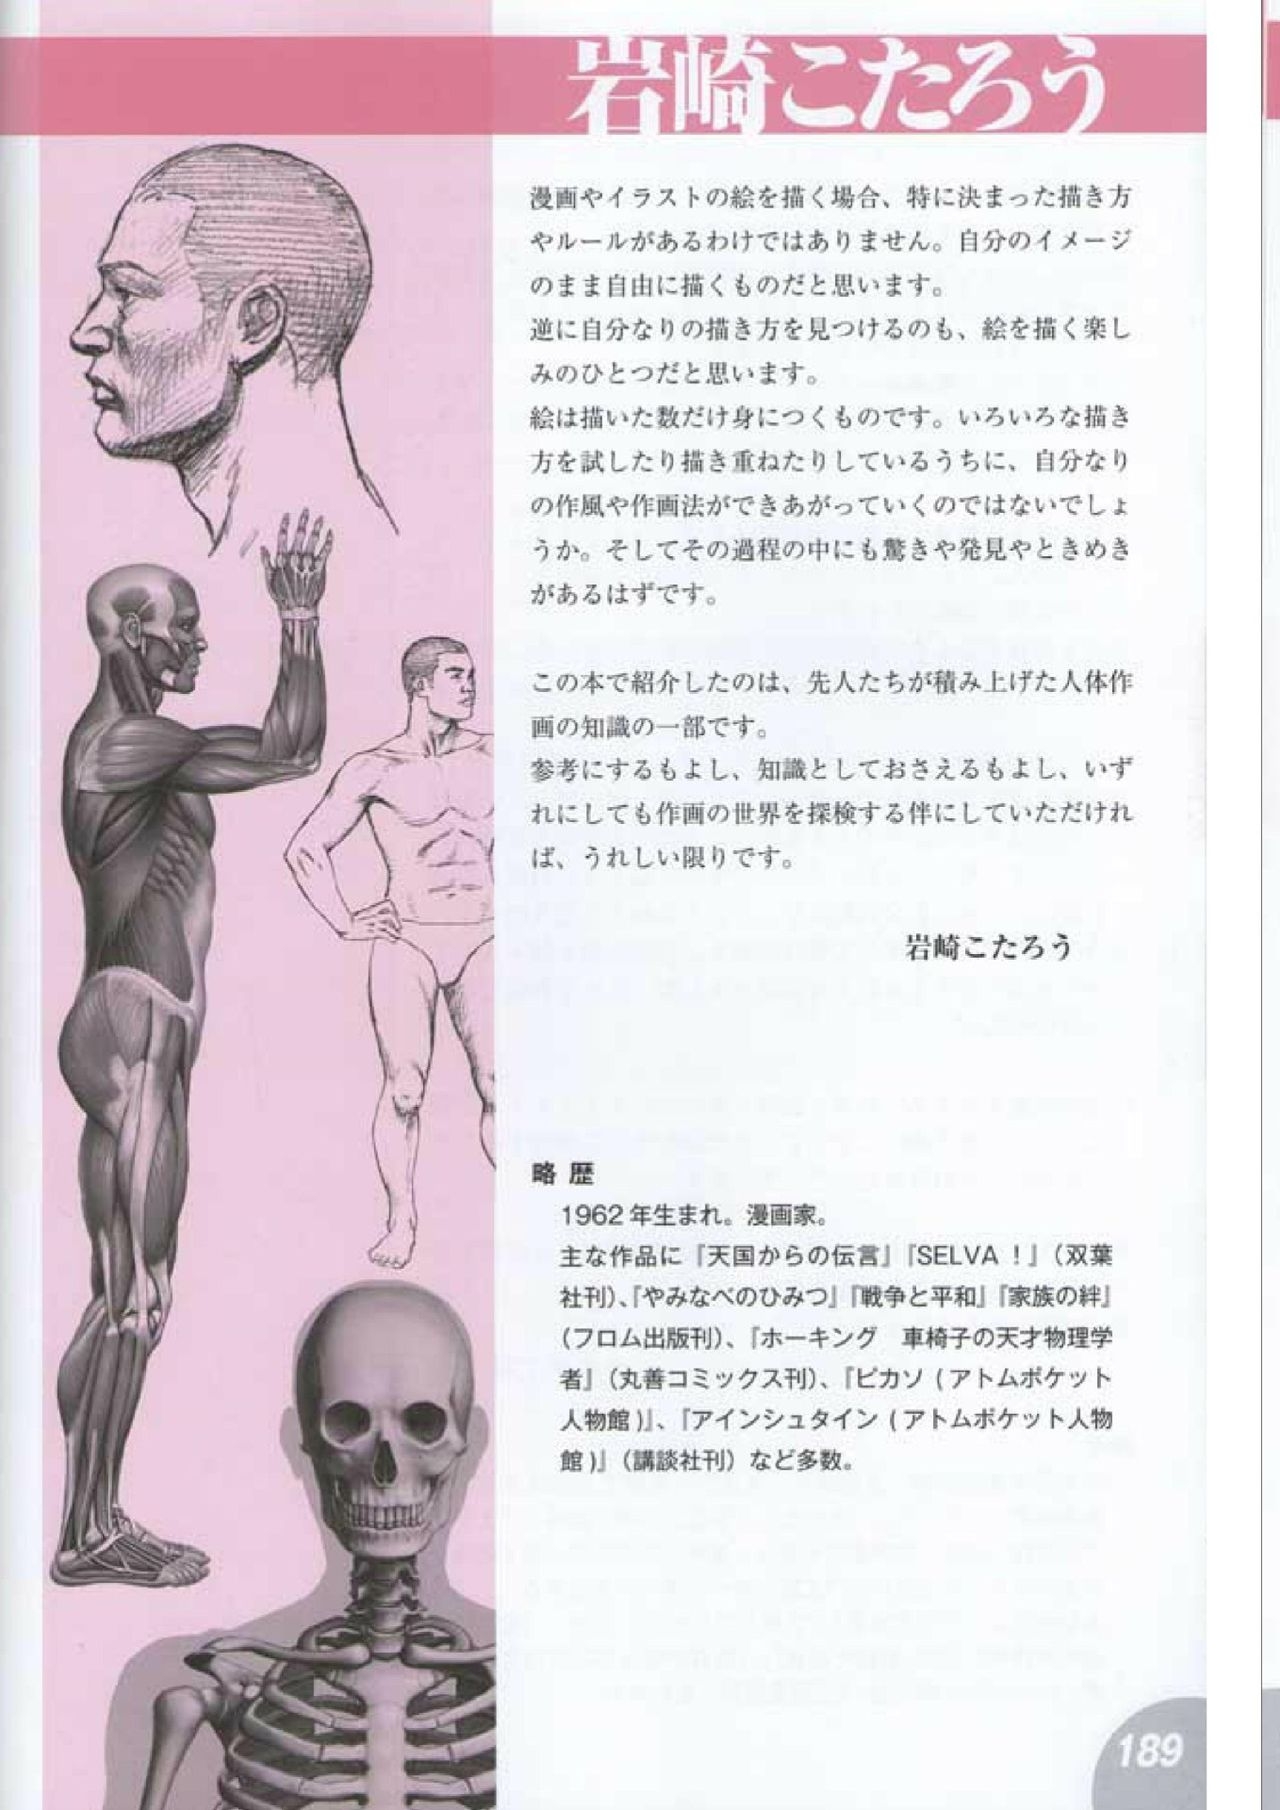 How to draw a character drawing from a human anatomical chart 187